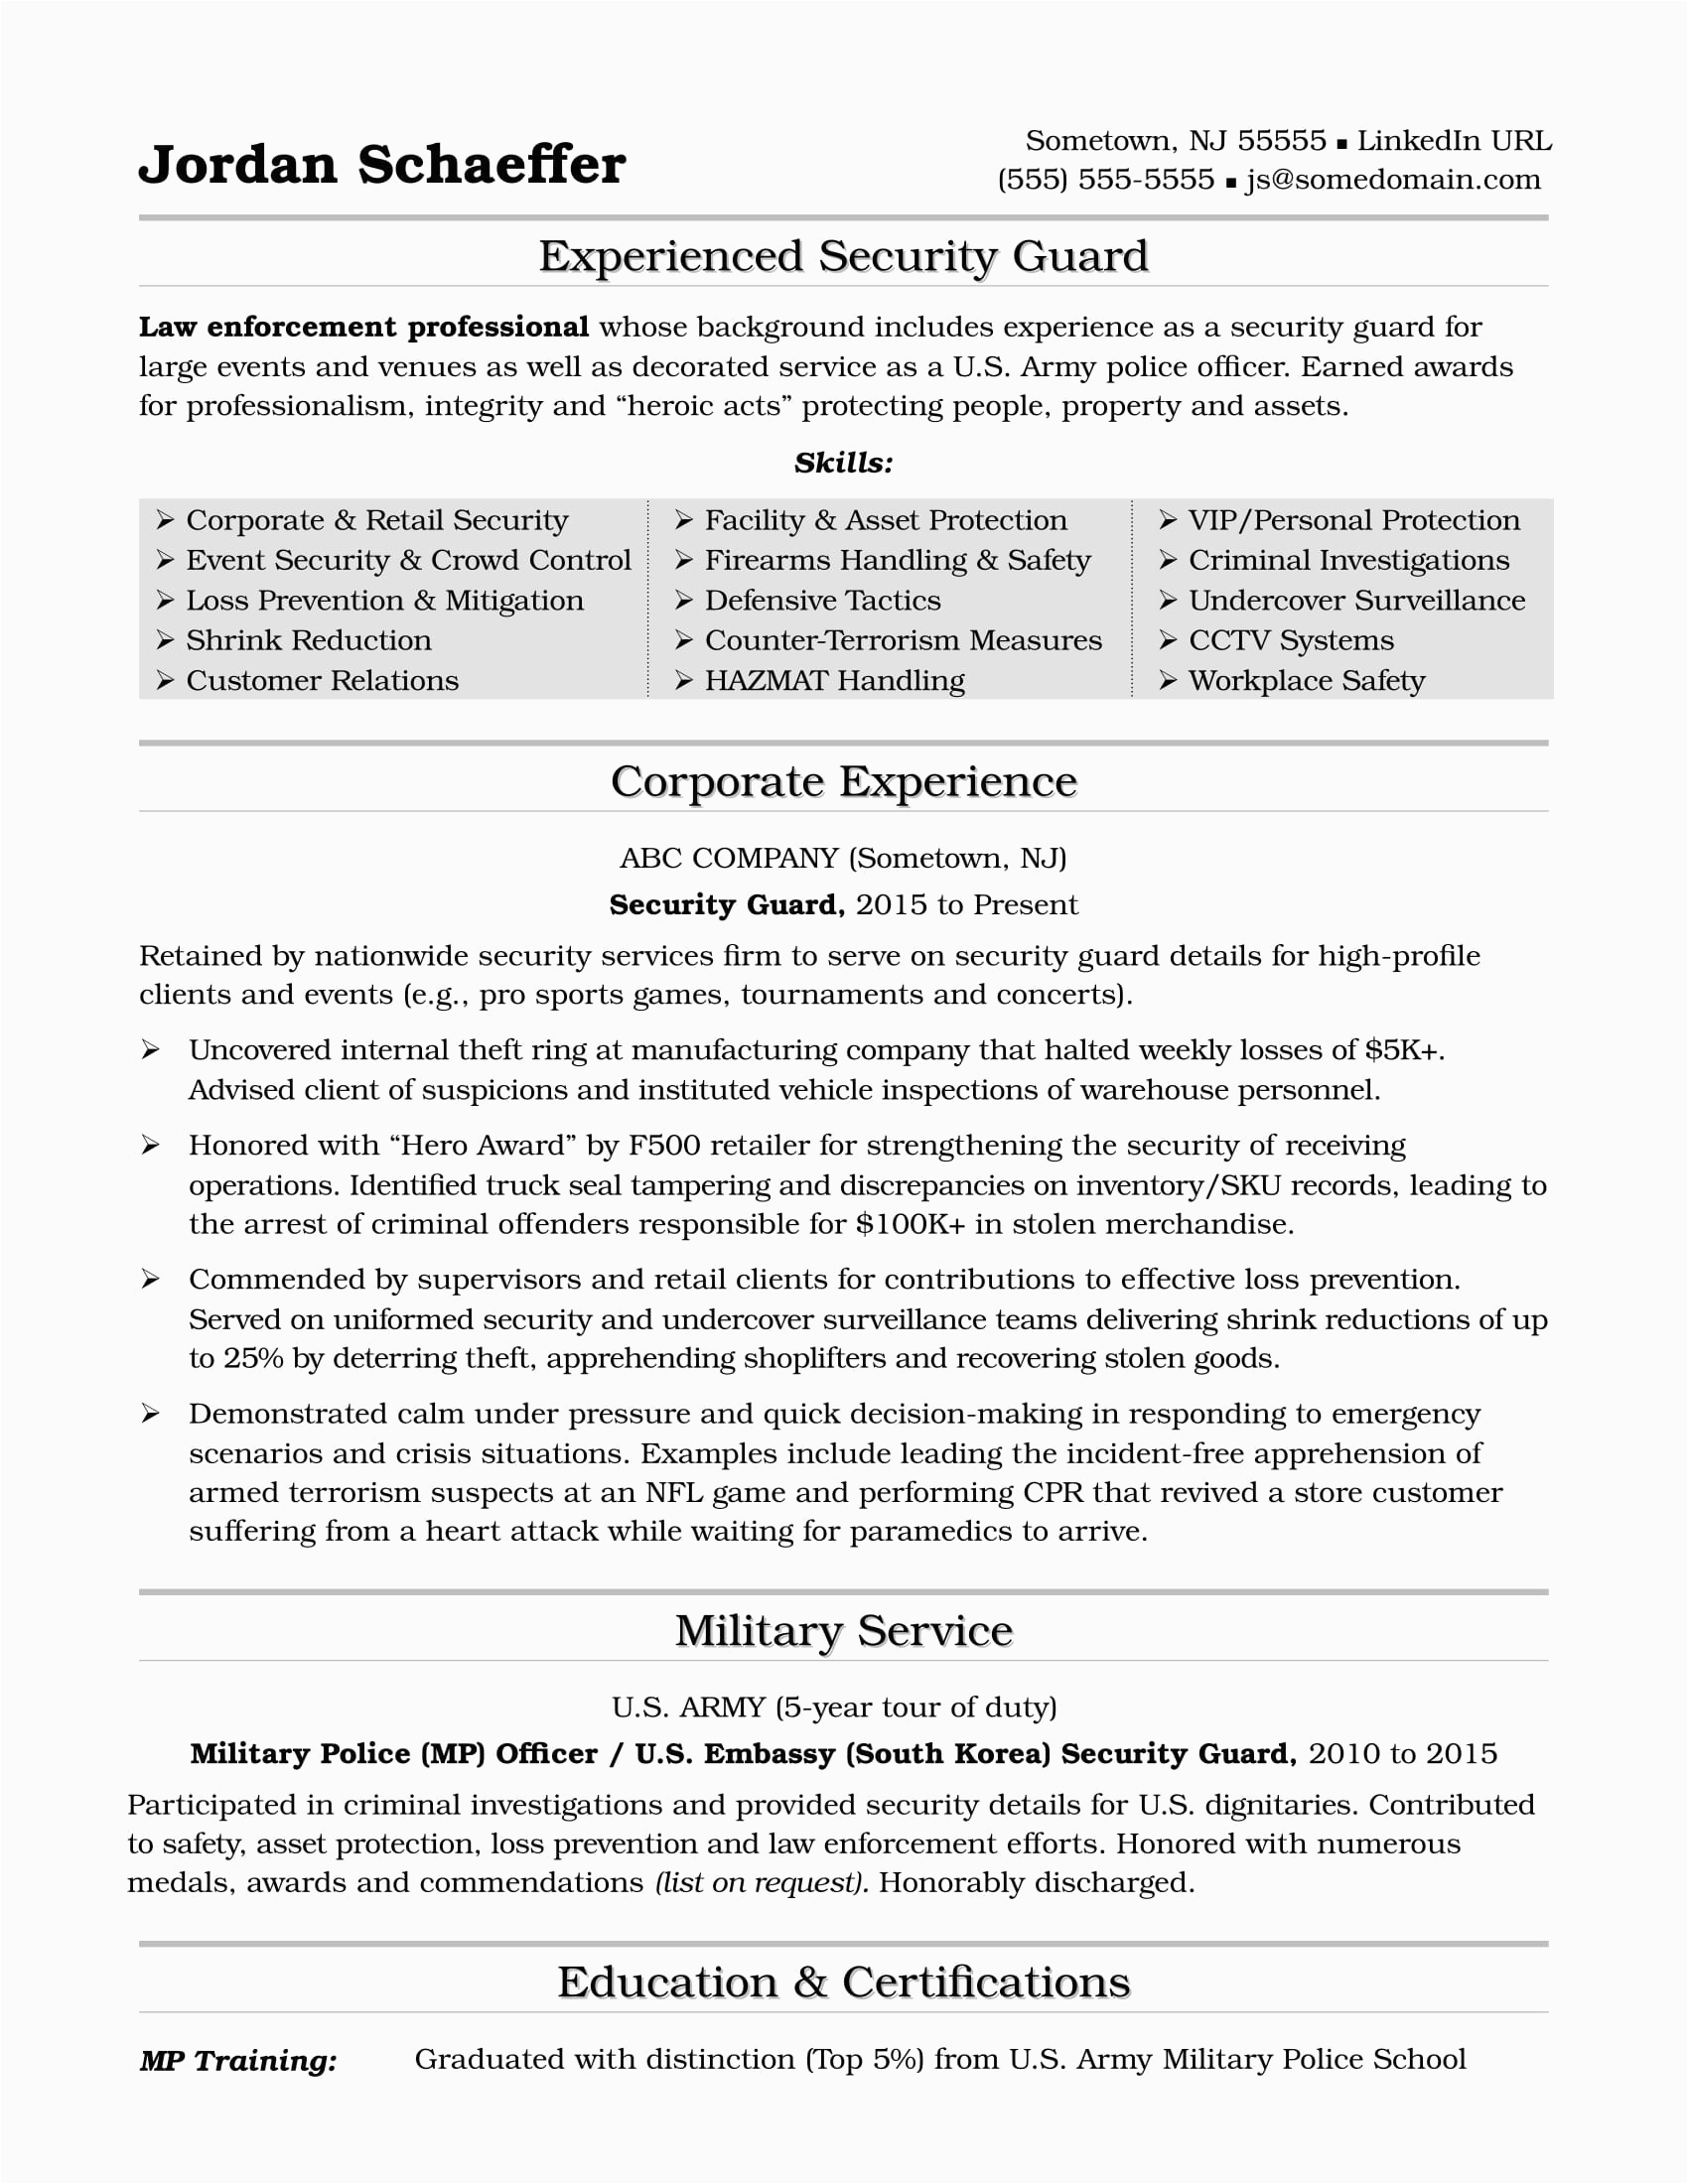 Security Guard Resume Examples and Samples Security Guard Resume Sample